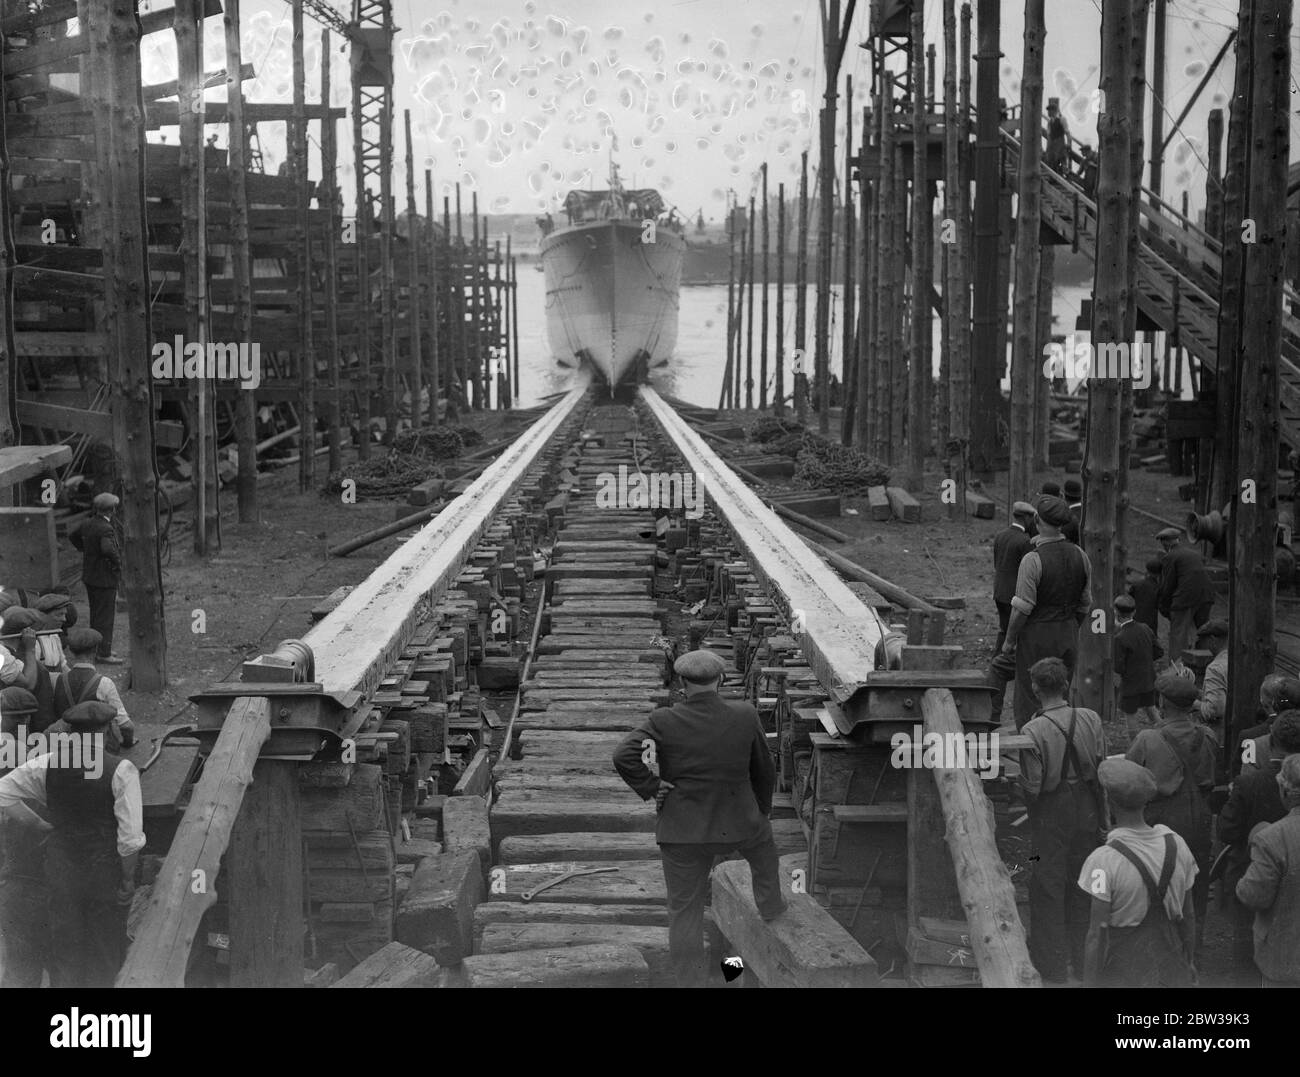 New HMS Grafton (H89) a G-class destroyer launched by Lady Barrie at Messrs Thorneycroft's yards at Woolston near Southampton . Photo shows her sliding into the water from her slipway at the launch . 22 July 1935 Stock Photo